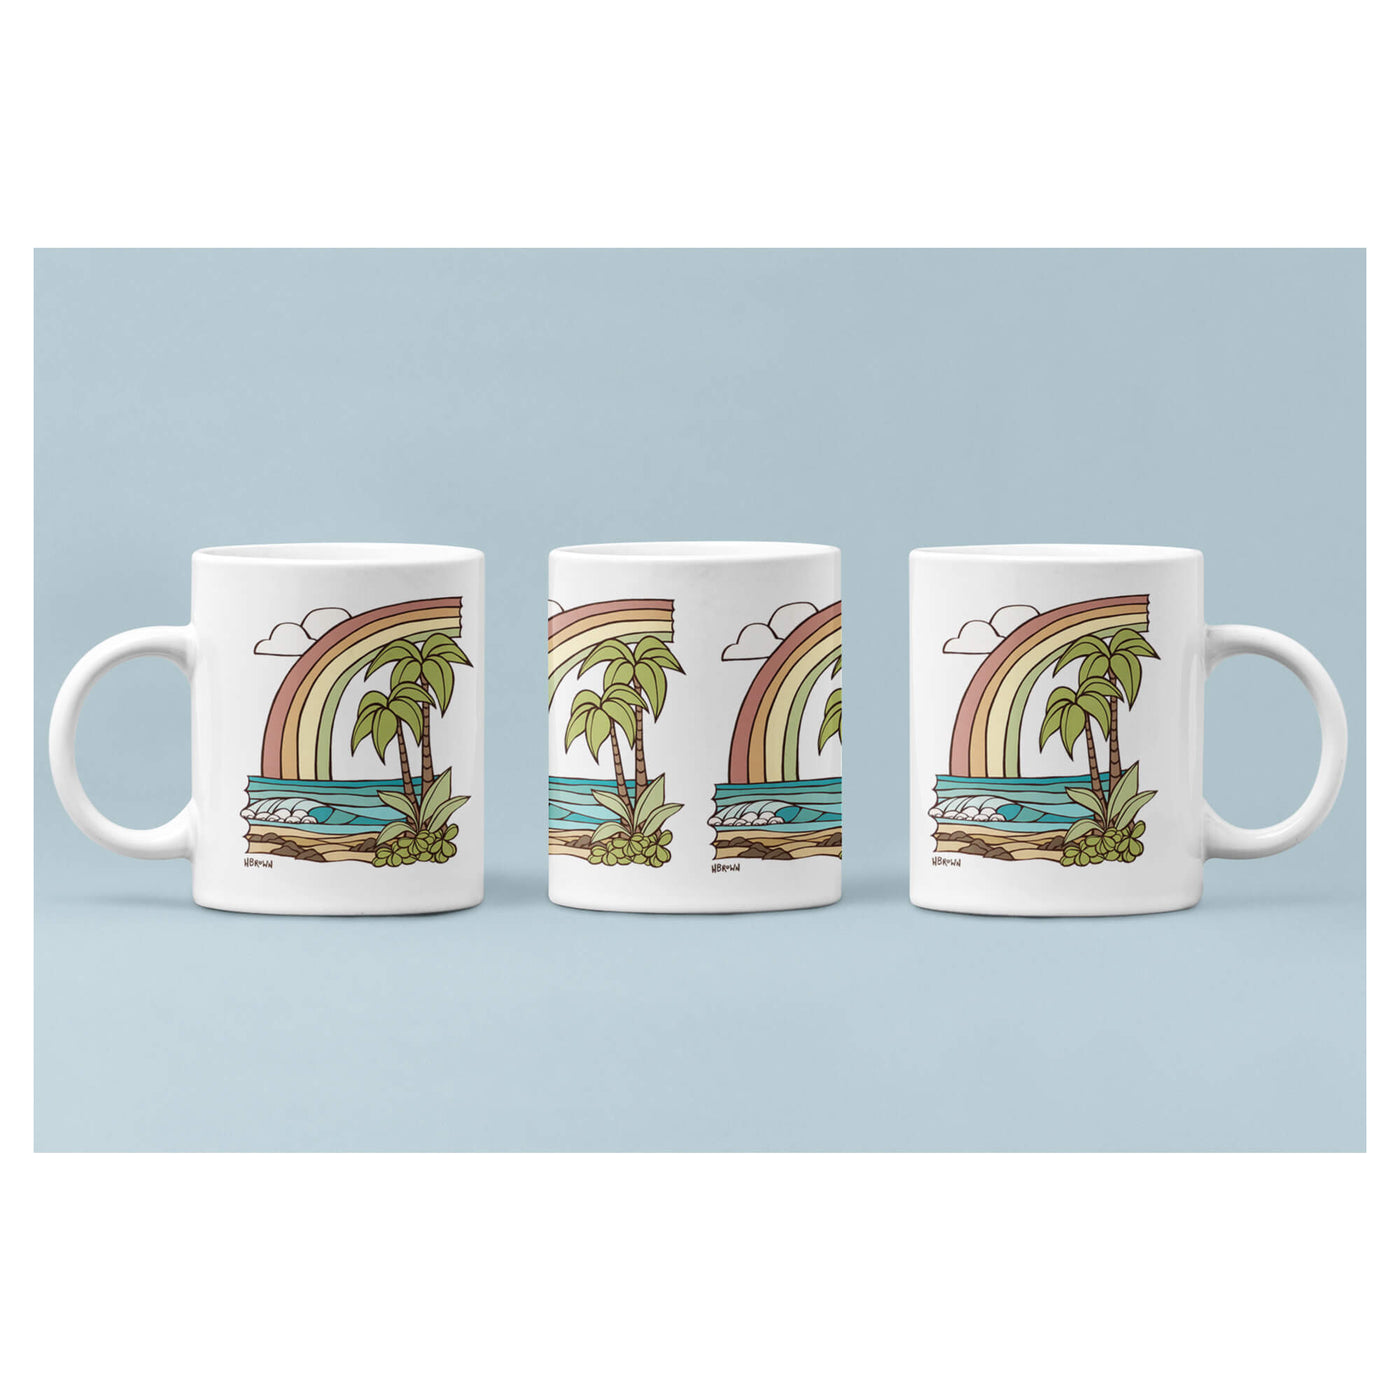 A white mug featuring a seascape with a rainbow by Hawaii surf artist Heather Brown